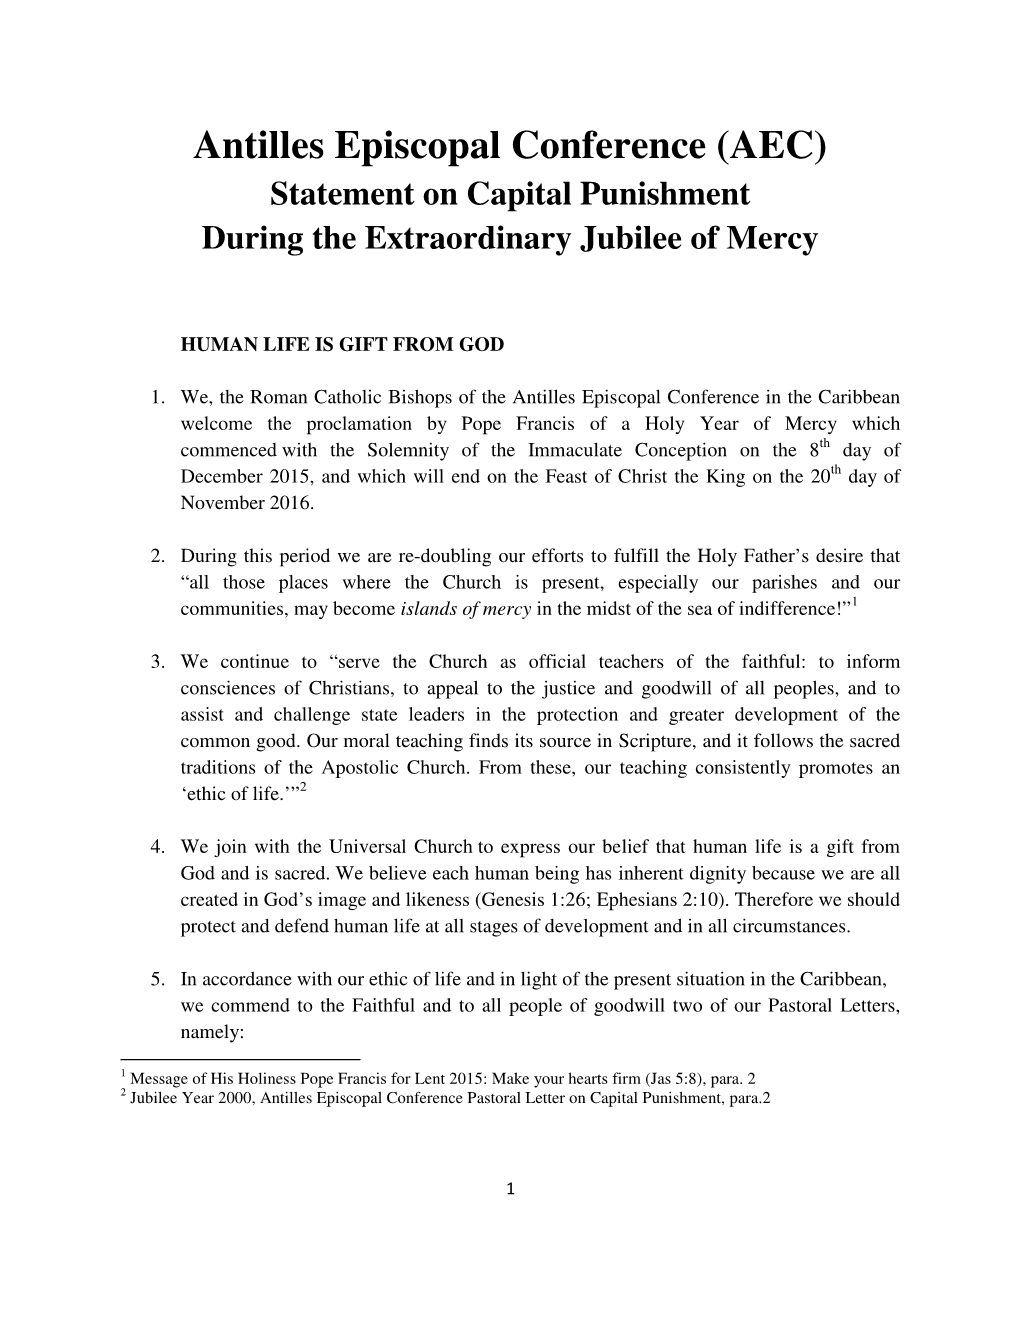 Antilles Episcopal Conference (AEC) Statement on Capital Punishment During the Extraordinary Jubilee of Mercy